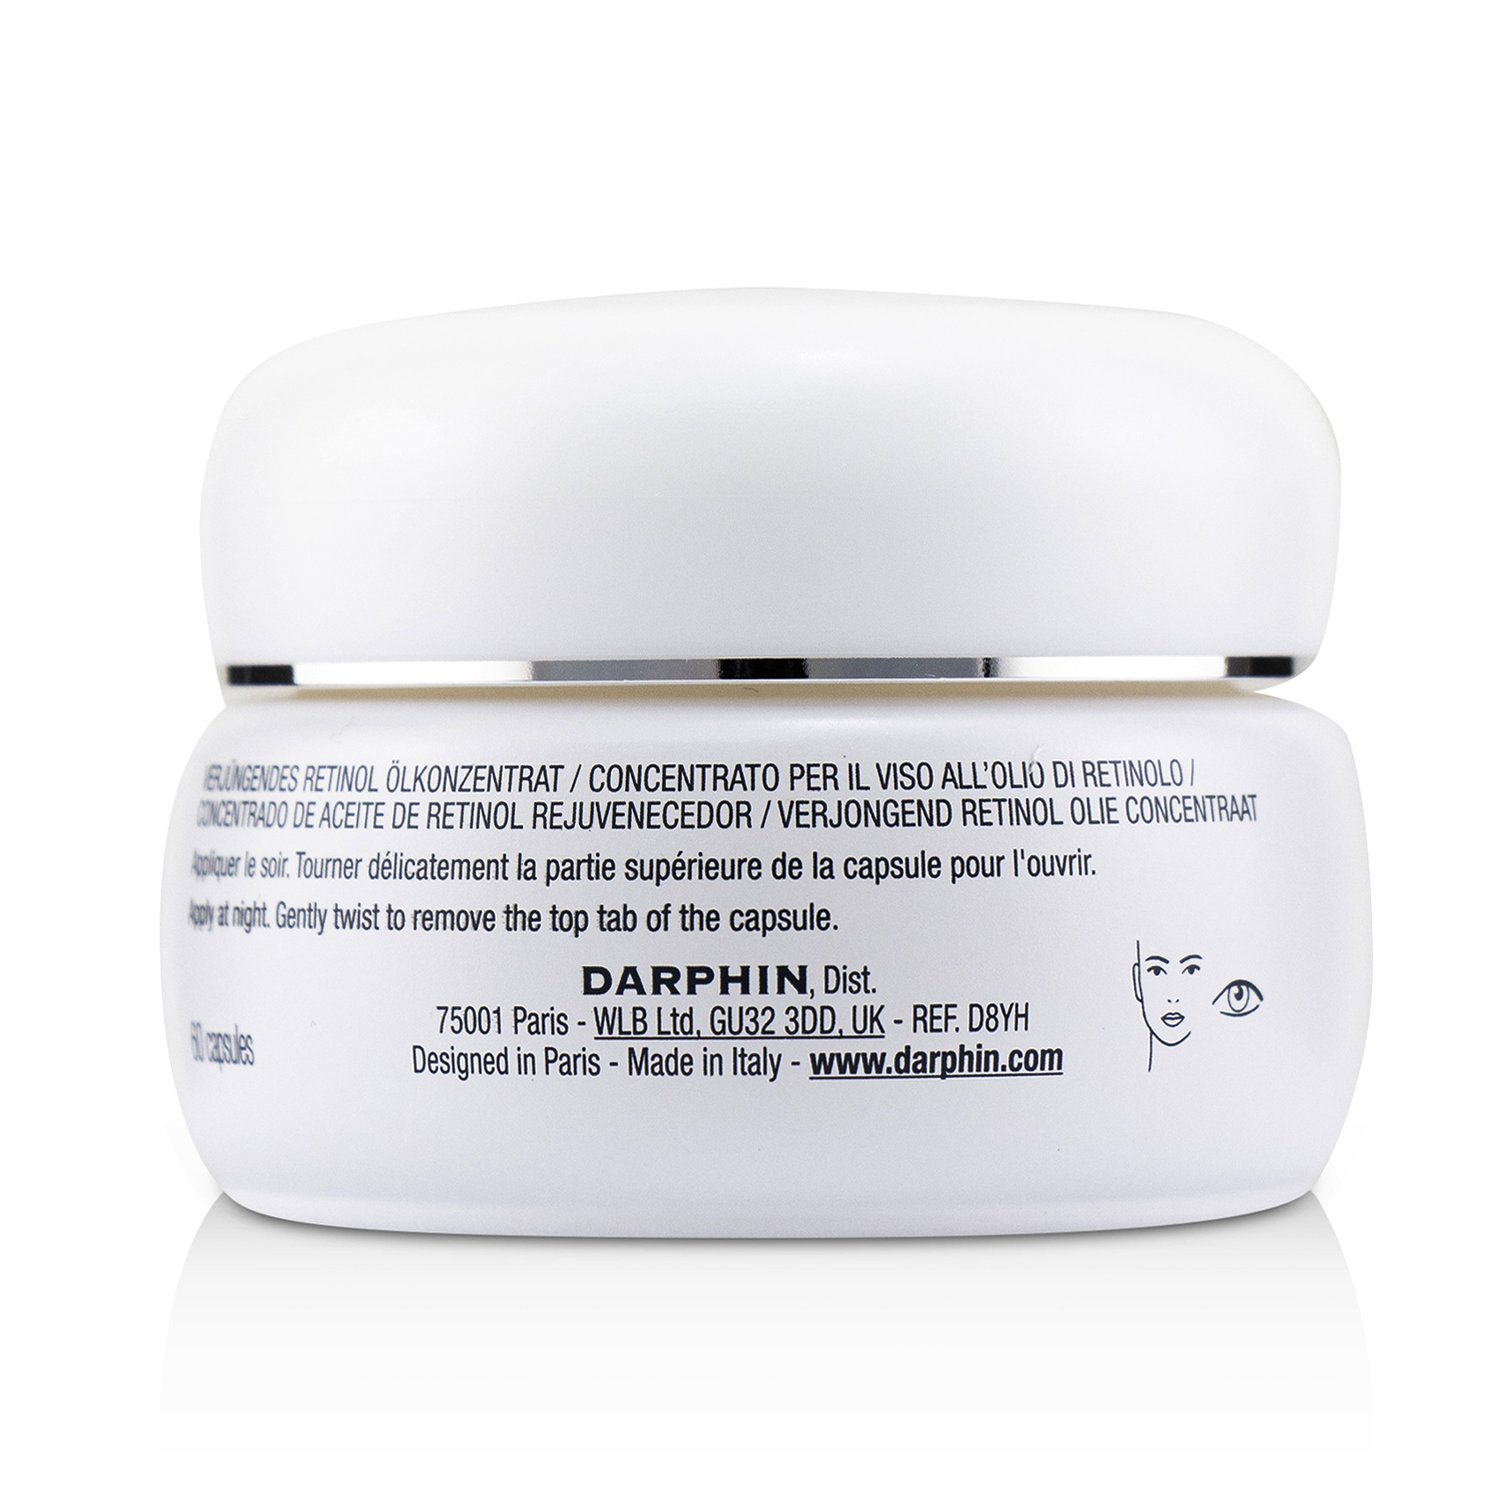 Darphin Ideal Resource Youth Retinol Oil Concentrate 60caps